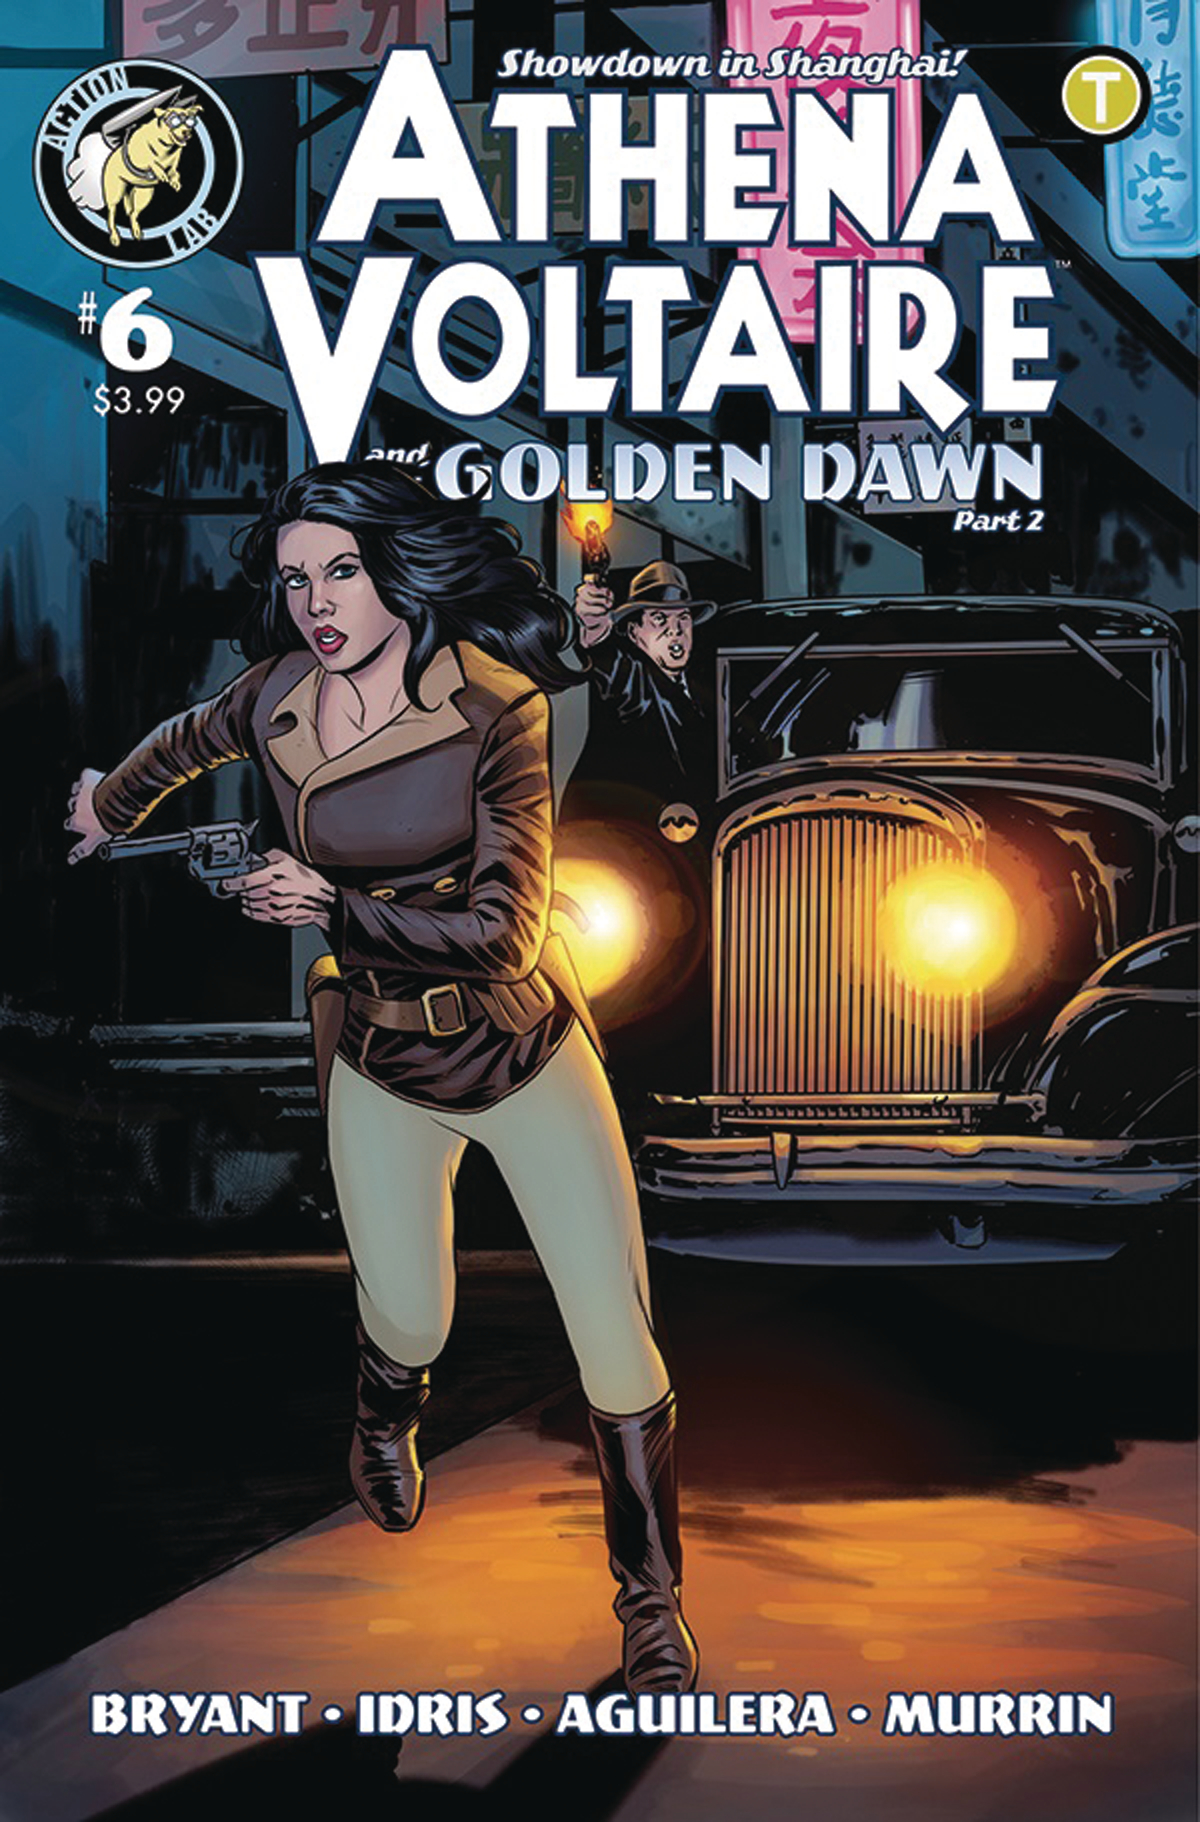 ATHENA VOLTAIRE 2018 ONGOING #6 CVR A BRYANT